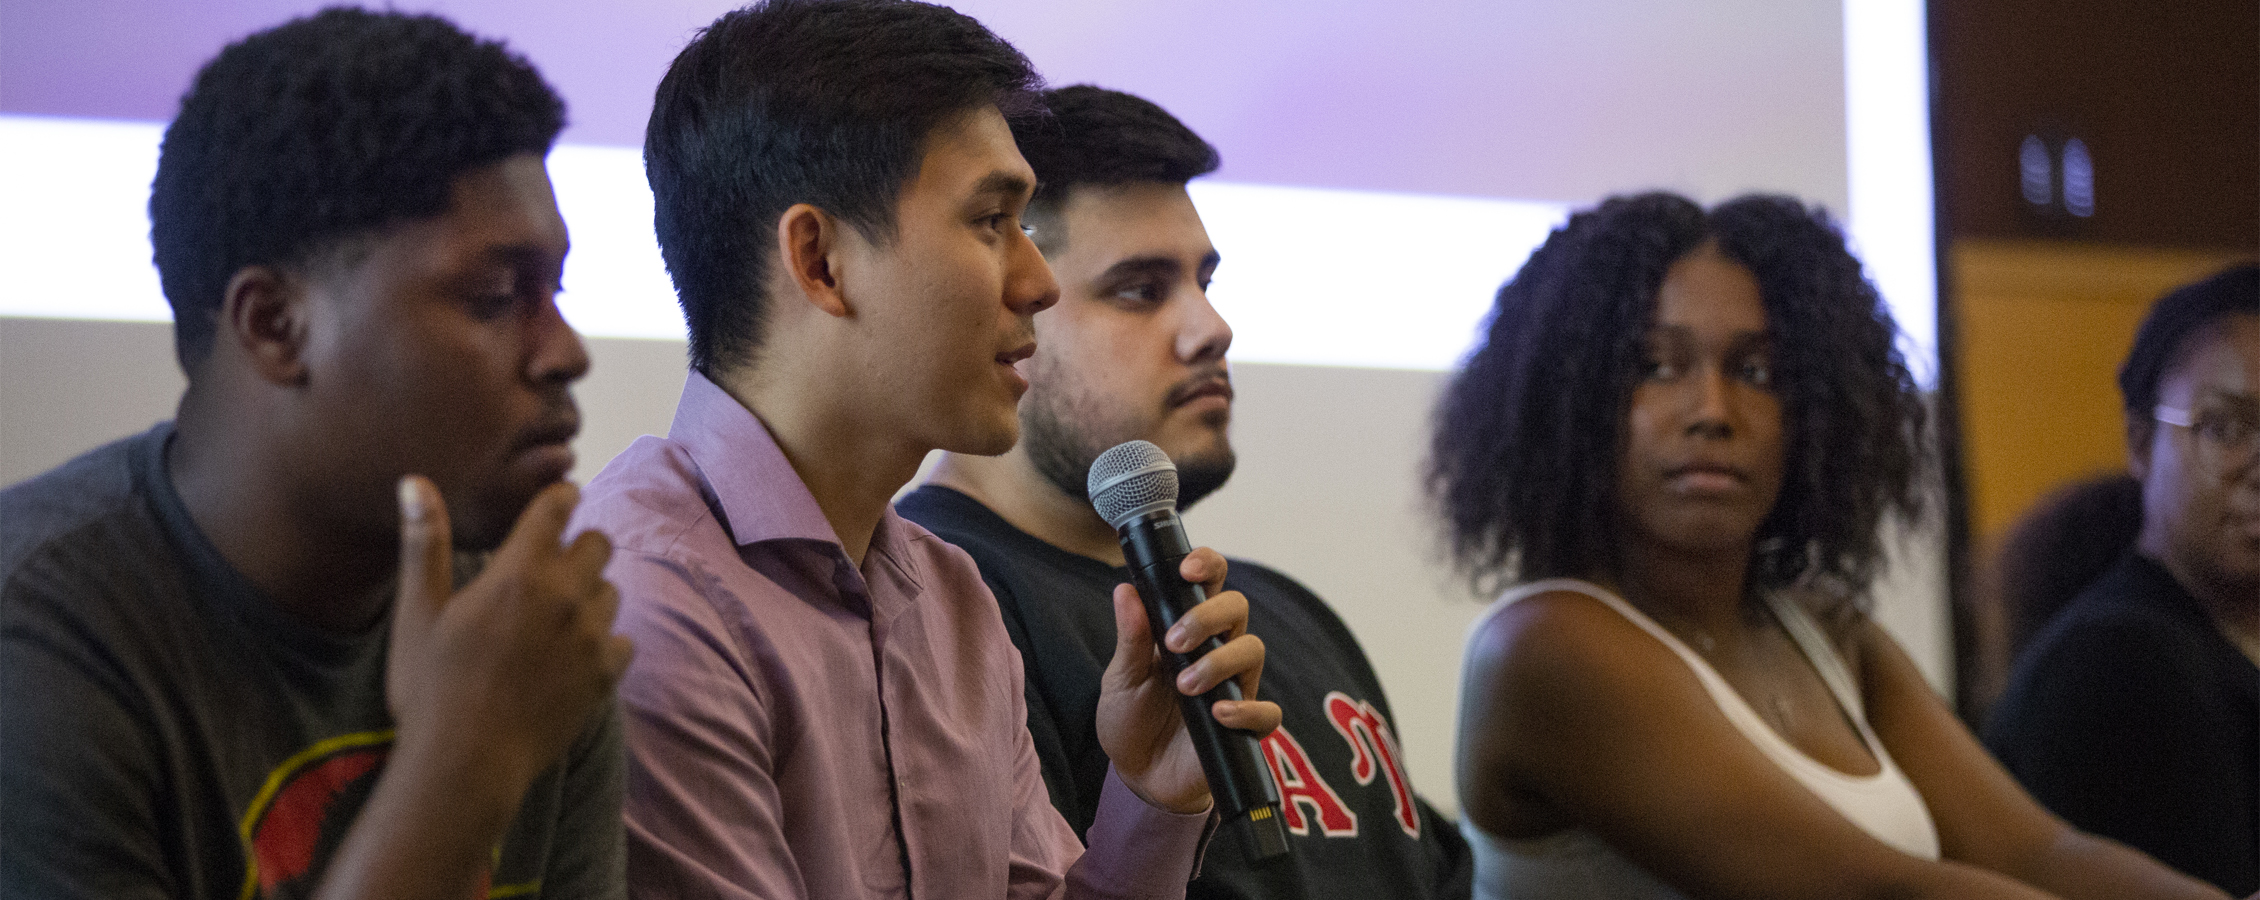 Four students are seated in the front of a room speaking into a microphone.